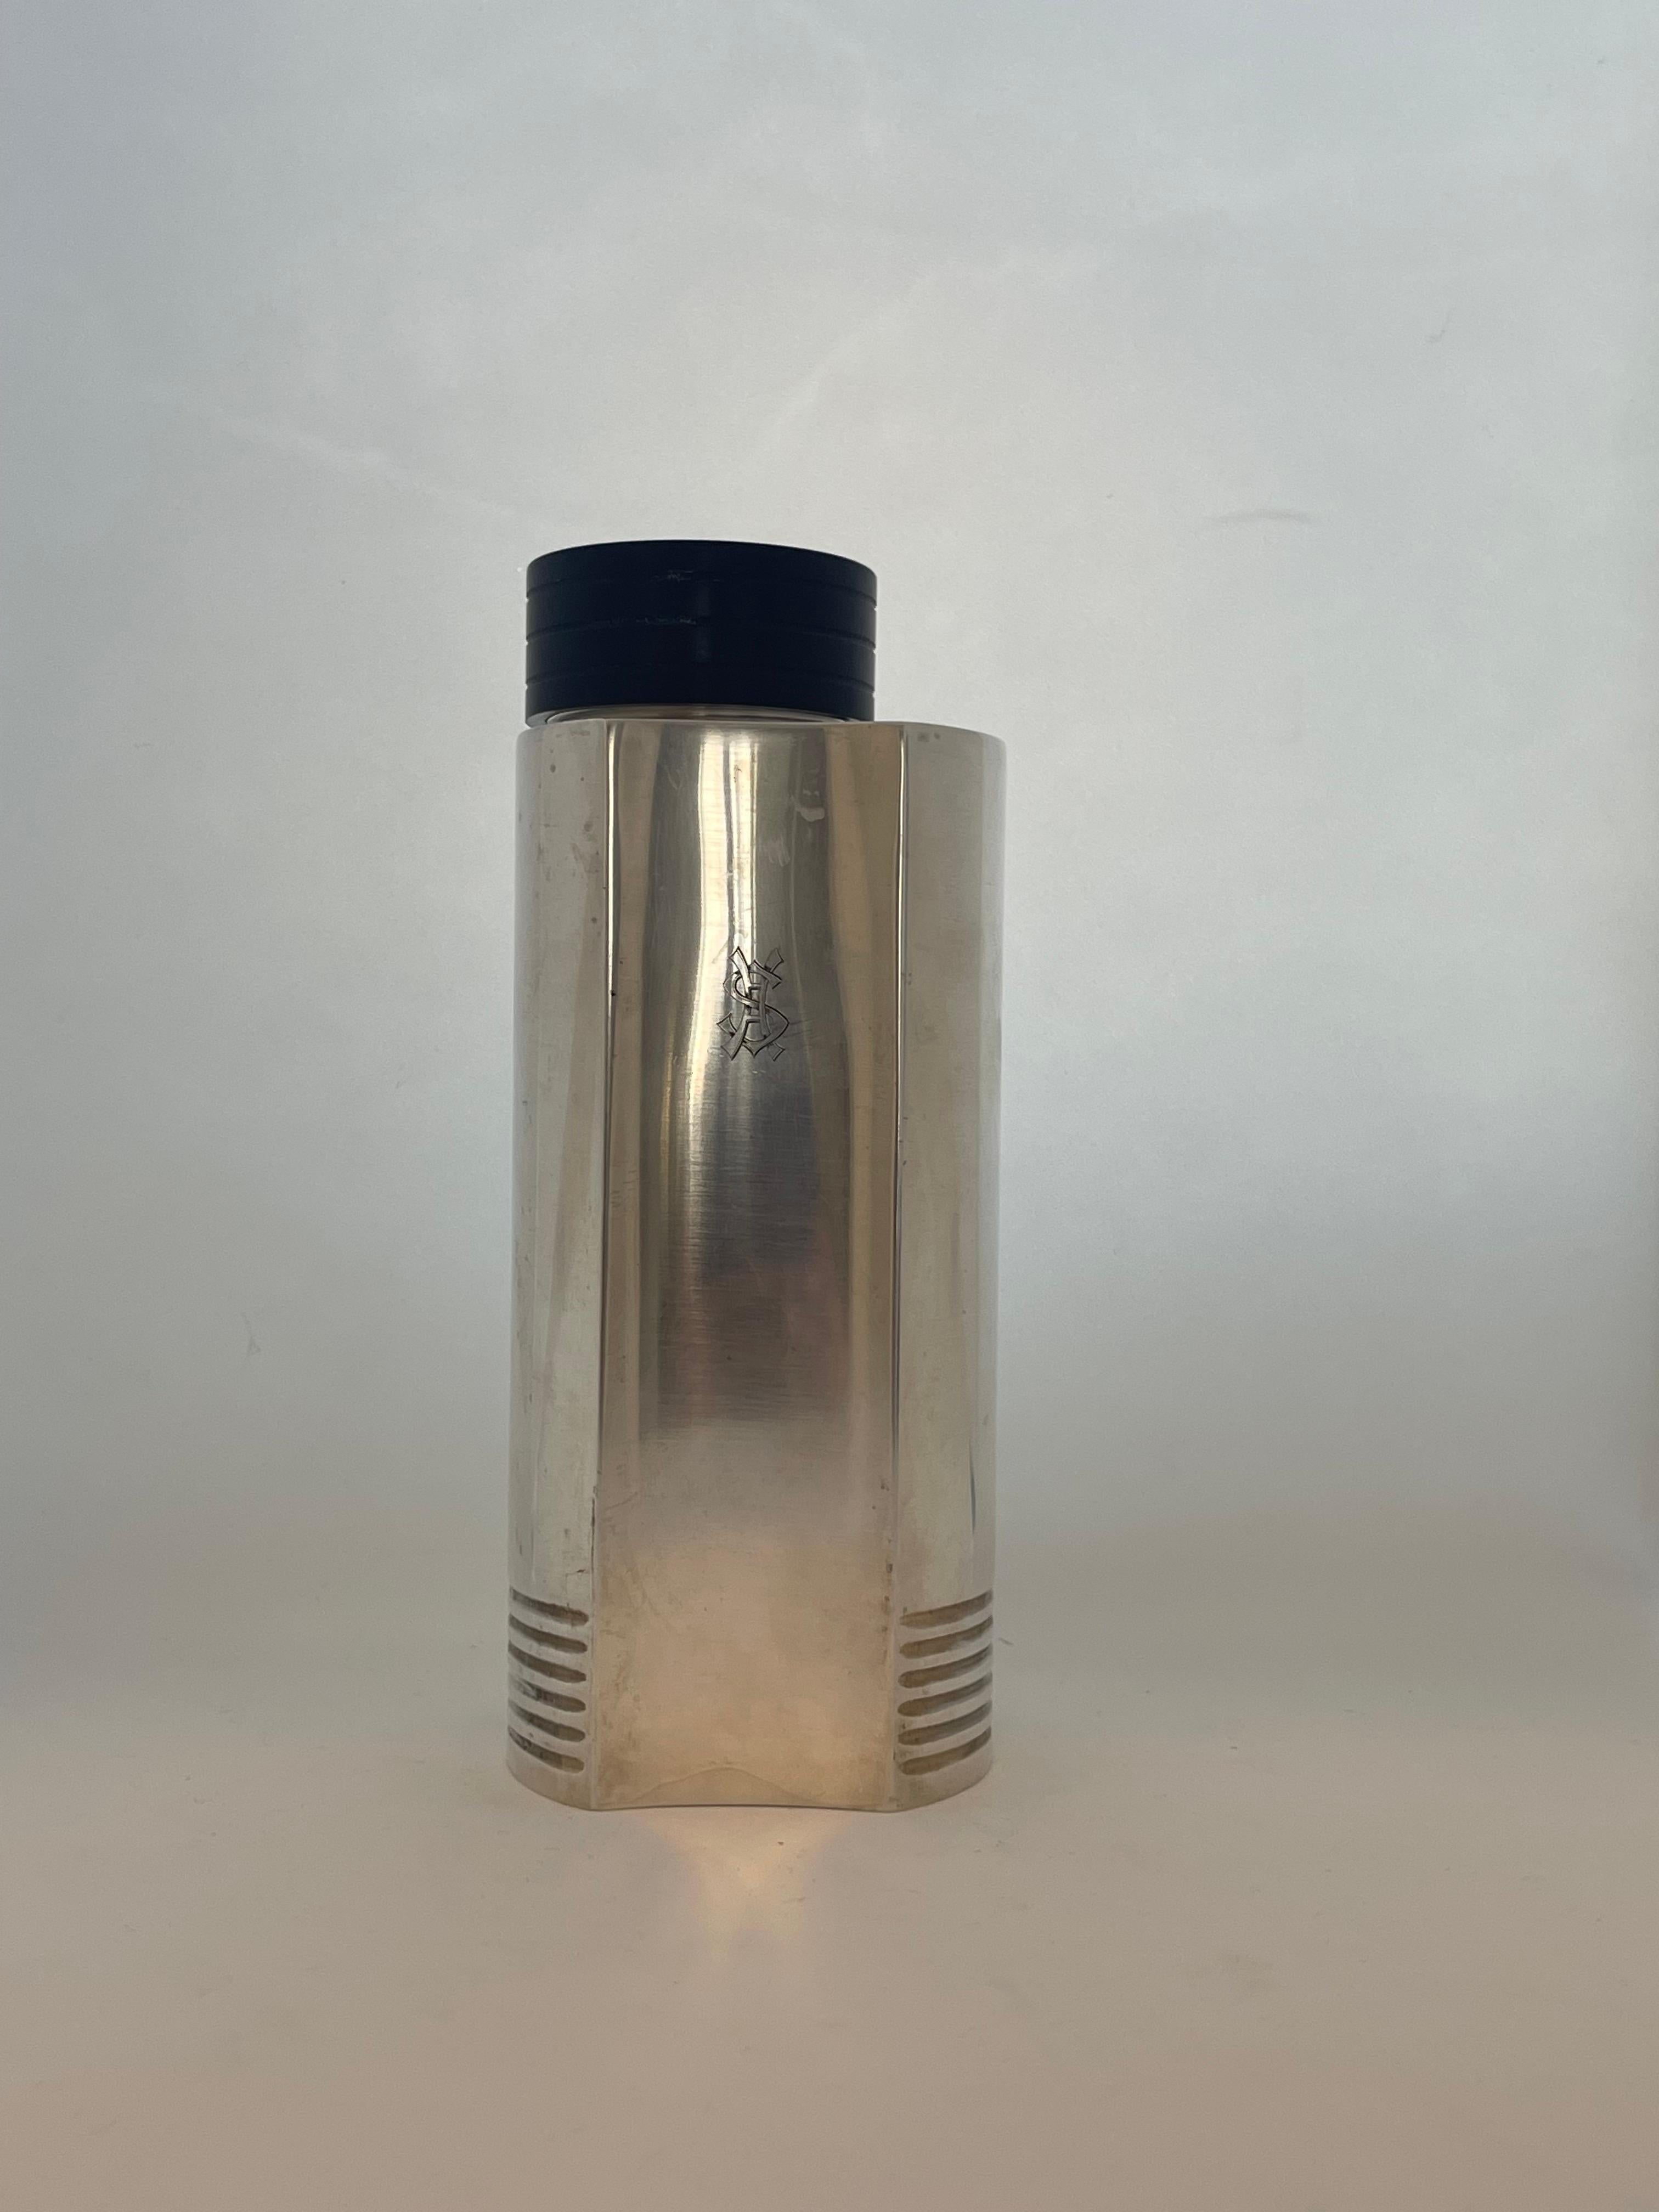 Cocktail Shaker by Folke Arstrom Silver Plated for Gab Sweden, 1930 For Sale 3